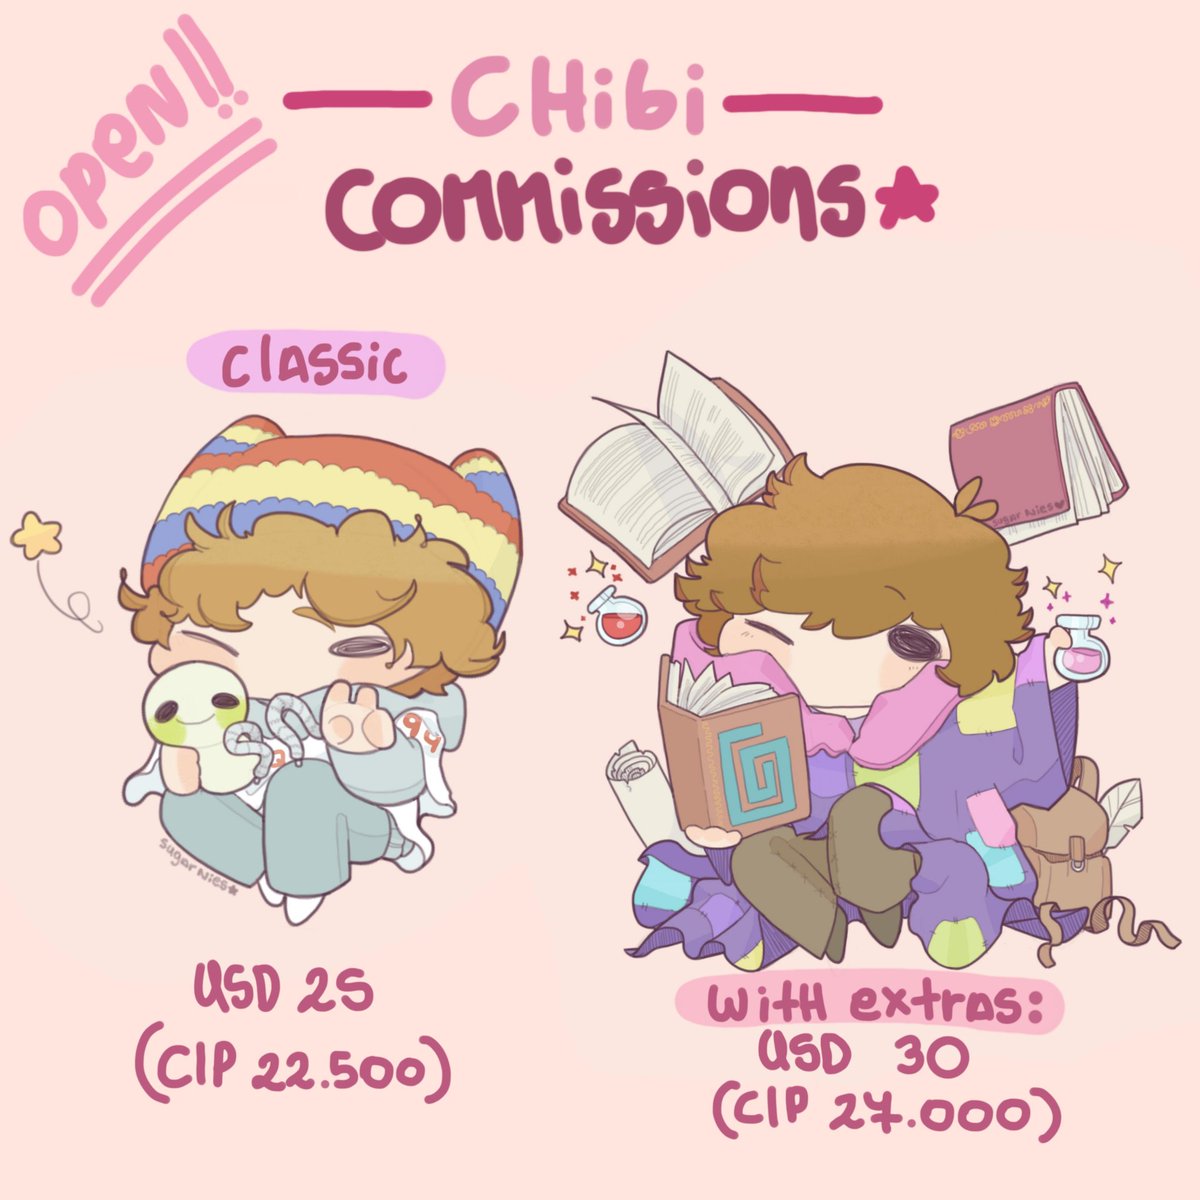 Chibi Commissions are OPEN!!🌸

Dm me if you are interested:)
Please RT, I would really appreciate

(MORE INFO BELOW) 
#comissionsopen #comission #comissions #comisionesabiertas #chibicomissions